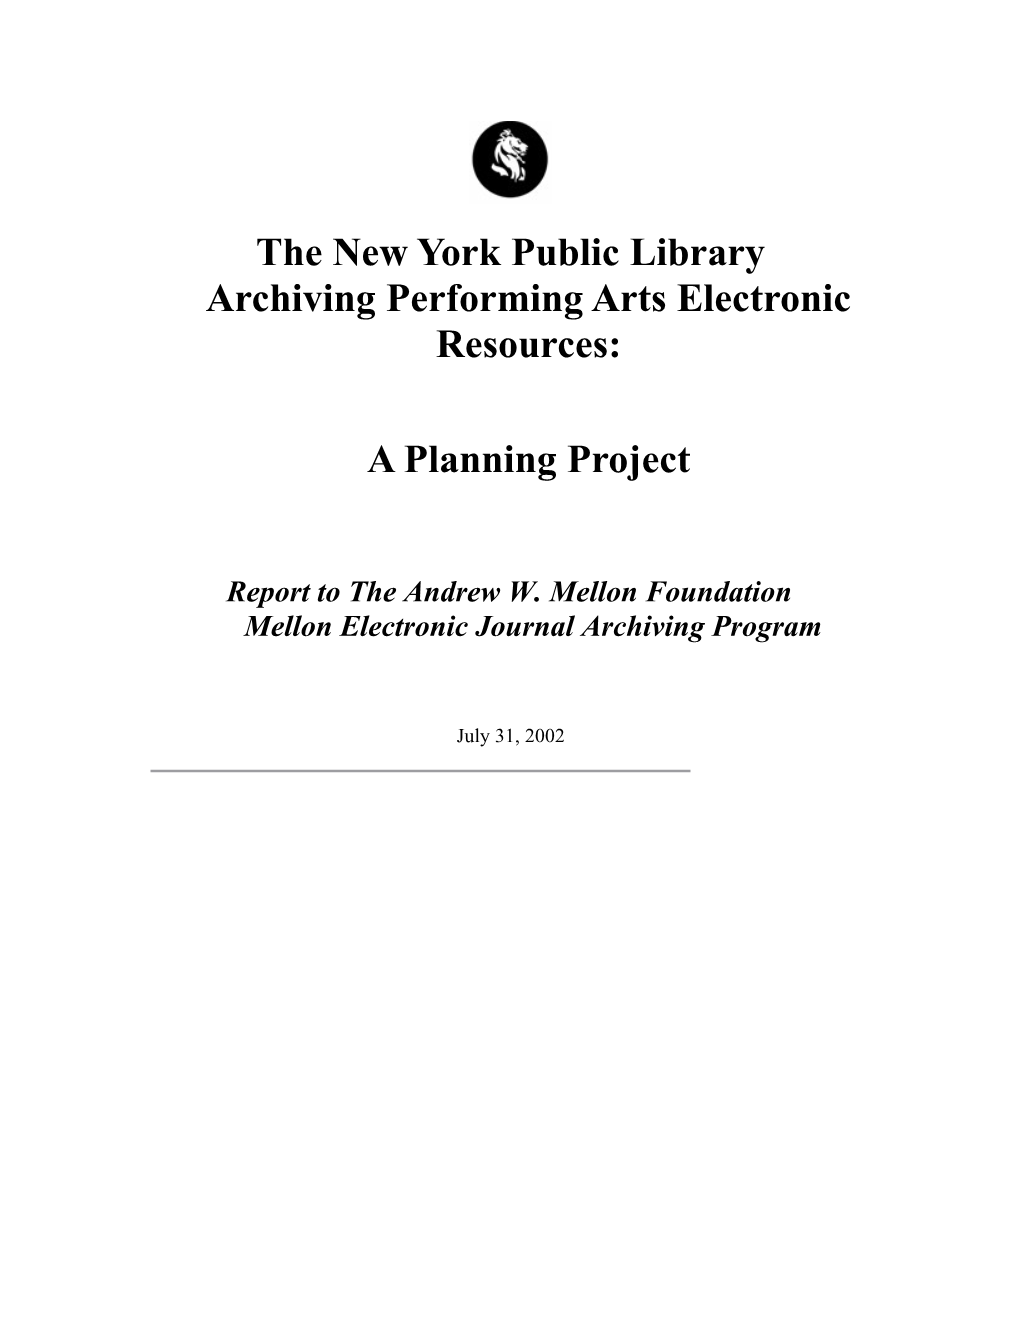 Progress Report for the Digital Library Federation Preservation Web Site Mellon Electronic